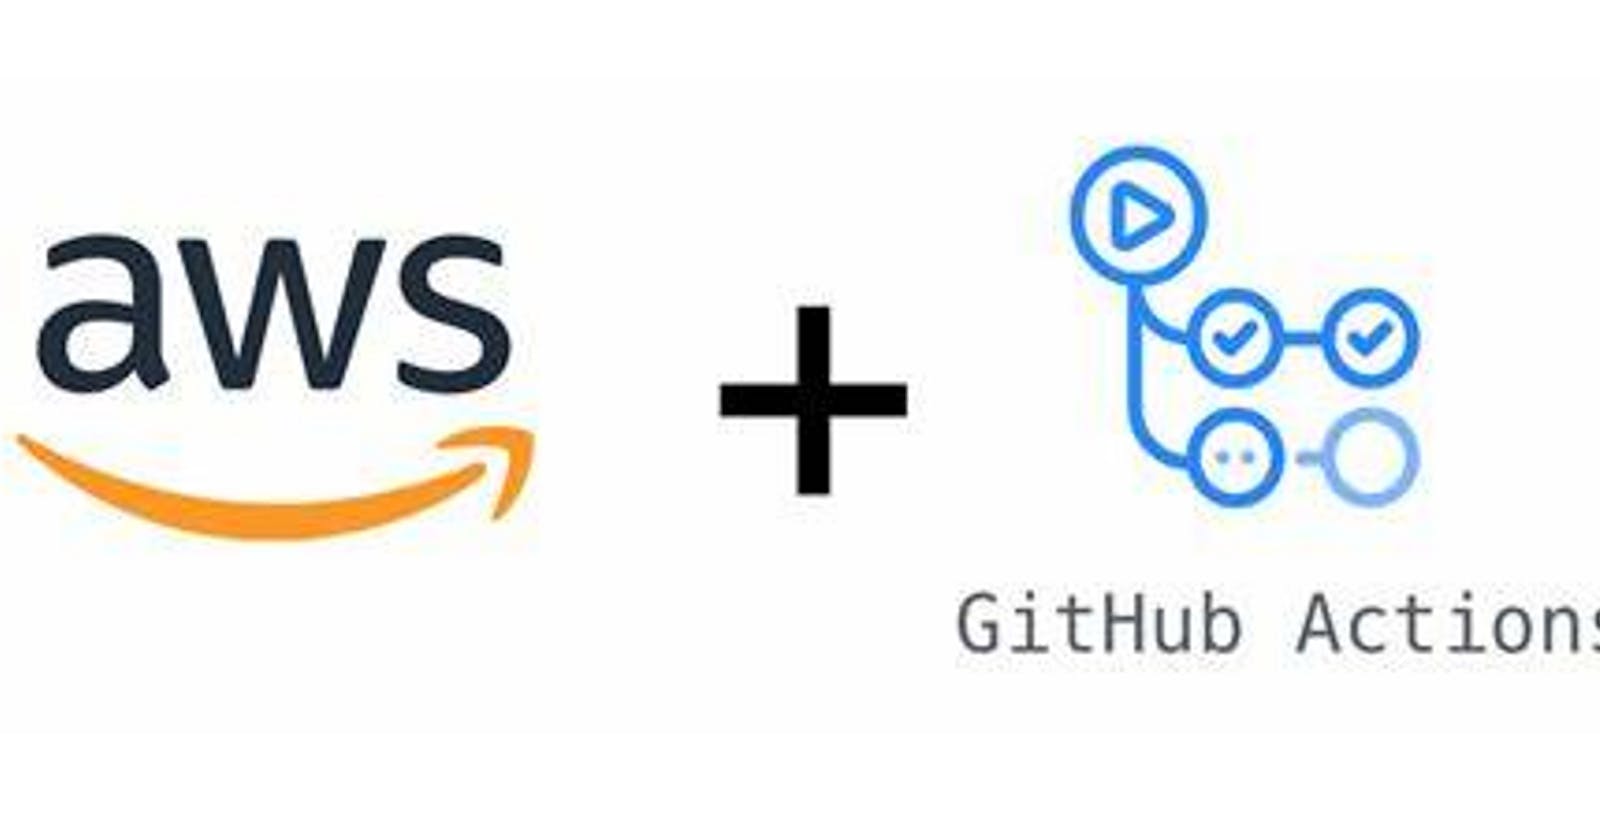 Connecting GitHub Actions to AWS with the Access keys.